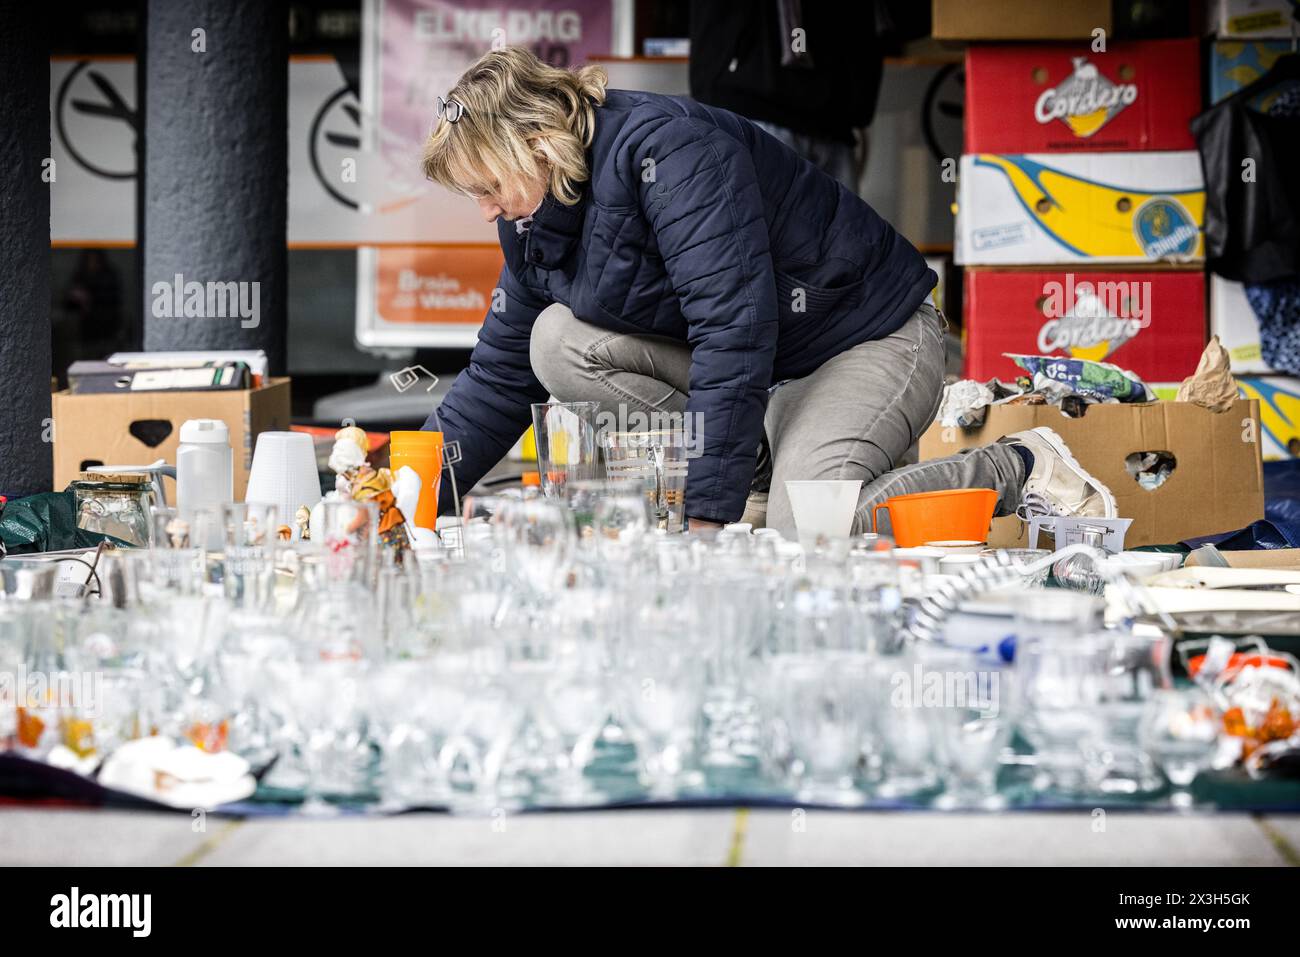 VELDHOVEN - People prepare for the flea market during the celebration of King's Day. While the royal family visited Emmen, the national holiday was also fully celebrated in the rest of the country. ANP ROB ENGELAAR netherlands out - belgium out Stock Photo